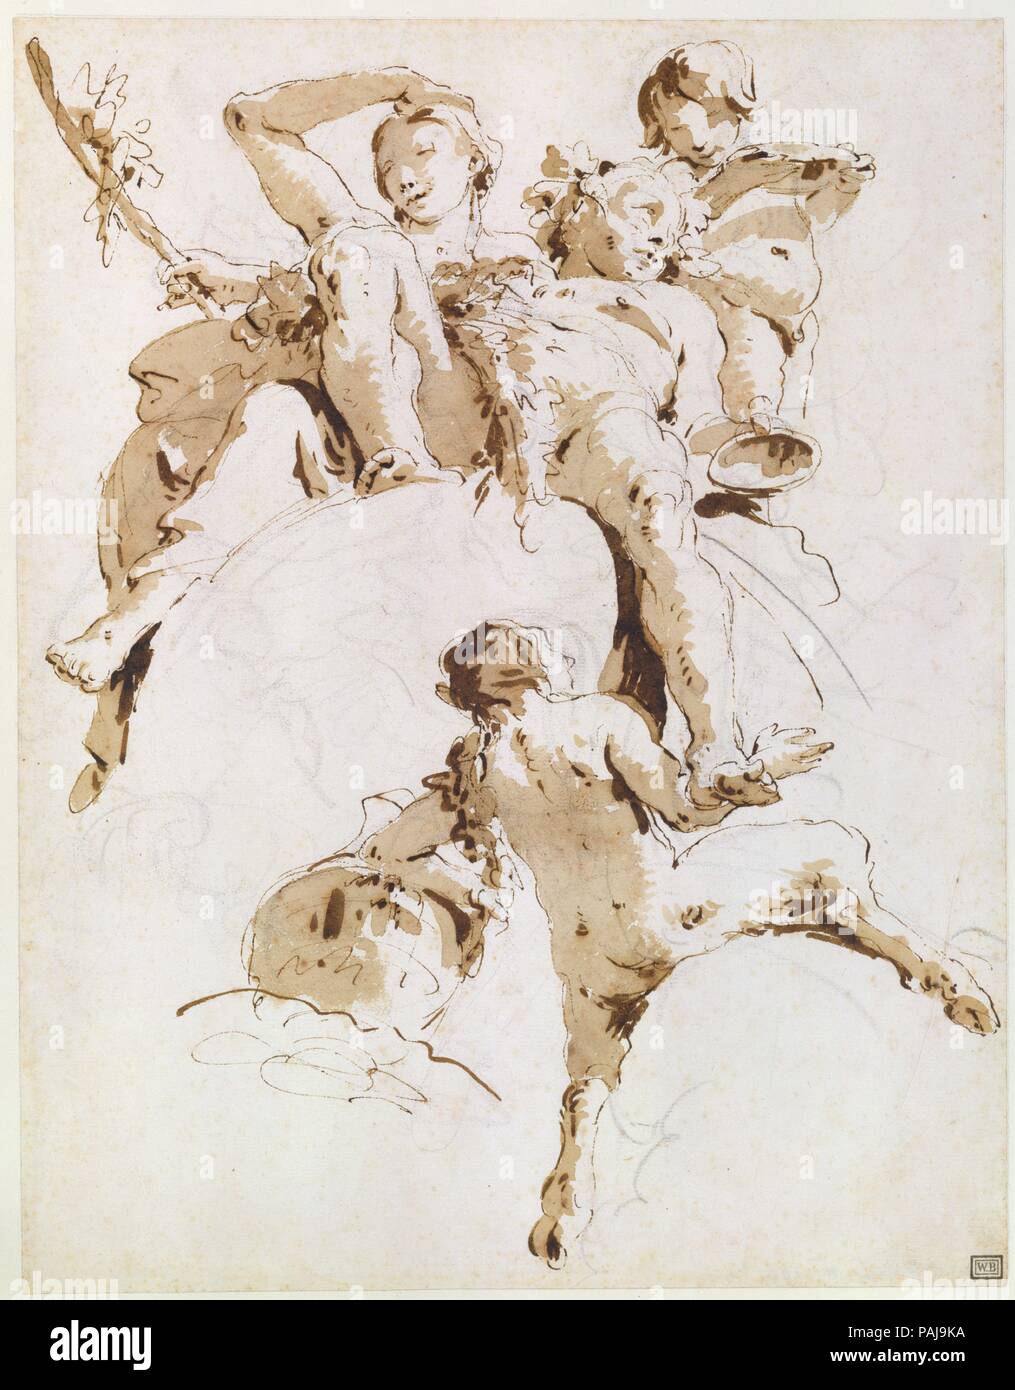 Bacchus and Ariadne. Artist: Giovanni Battista Tiepolo (Italian, Venice 1696-1770 Madrid). Dimensions: 12 5/16 x 9 9/16 in.  (31.2 x 24.3 cm). Date: ca. 1740.  Giambattista Tiepolo was arguably the greatest painter of eighteenth-century Europe, celebrated for his grand decorative cycles in Venetian churches, and in the villas and palaces of Italy, Germany, and Spain. Tiepolo was equally prized as a draftsman, his powers of invention brilliant and prolific. 'Bacchus and Ariadne' is one of Giambattista's most famous pen and wash drawings. It represents Bacchus with Ariadne and two members of his Stock Photo